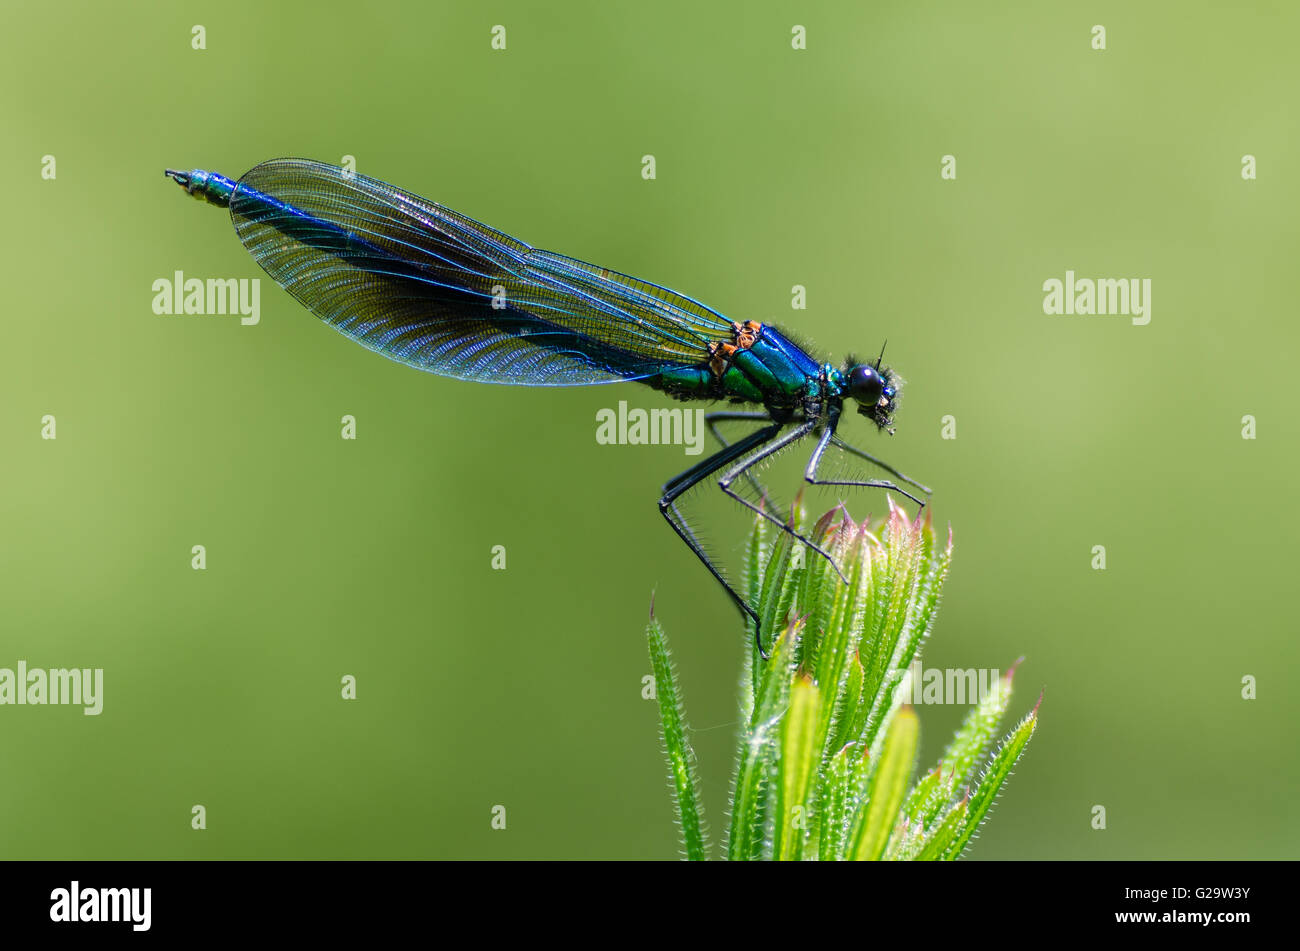 Banded demoiselle (Calopteryx splendens) male. Damselfly with dark band across centre of wings and metallic blue-green body Stock Photo